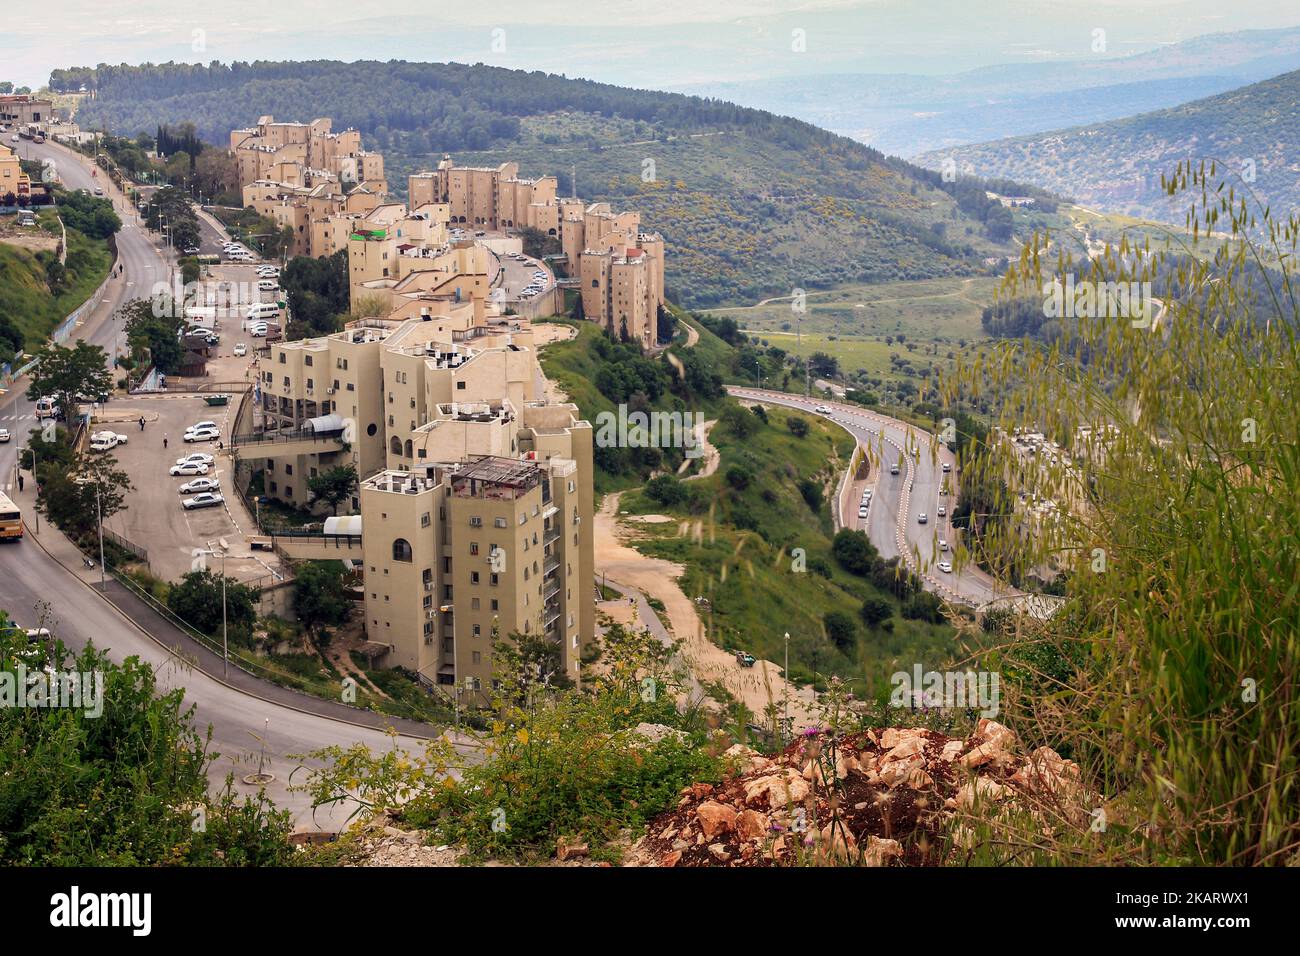 SAFED, ISRAEL - MAY 8, 2011: This is one of the modern urban districts of the city in the Upper Galilee, which is one of the four holy cities for Jews Stock Photo